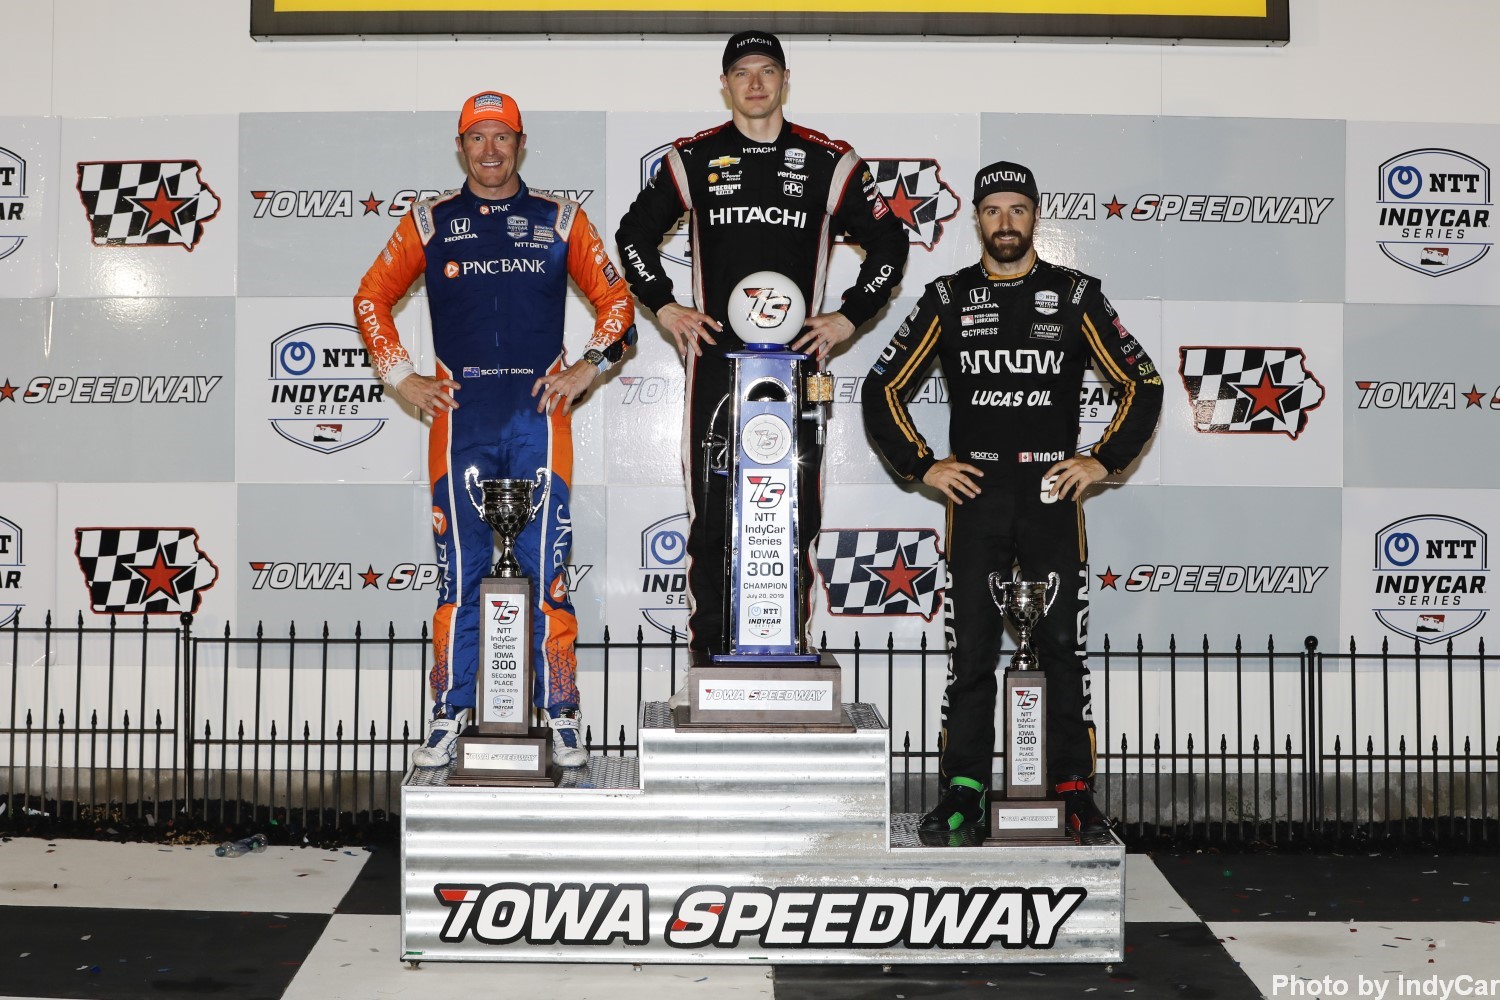 From left, Dixon, Newgarden and Hinchcliffe